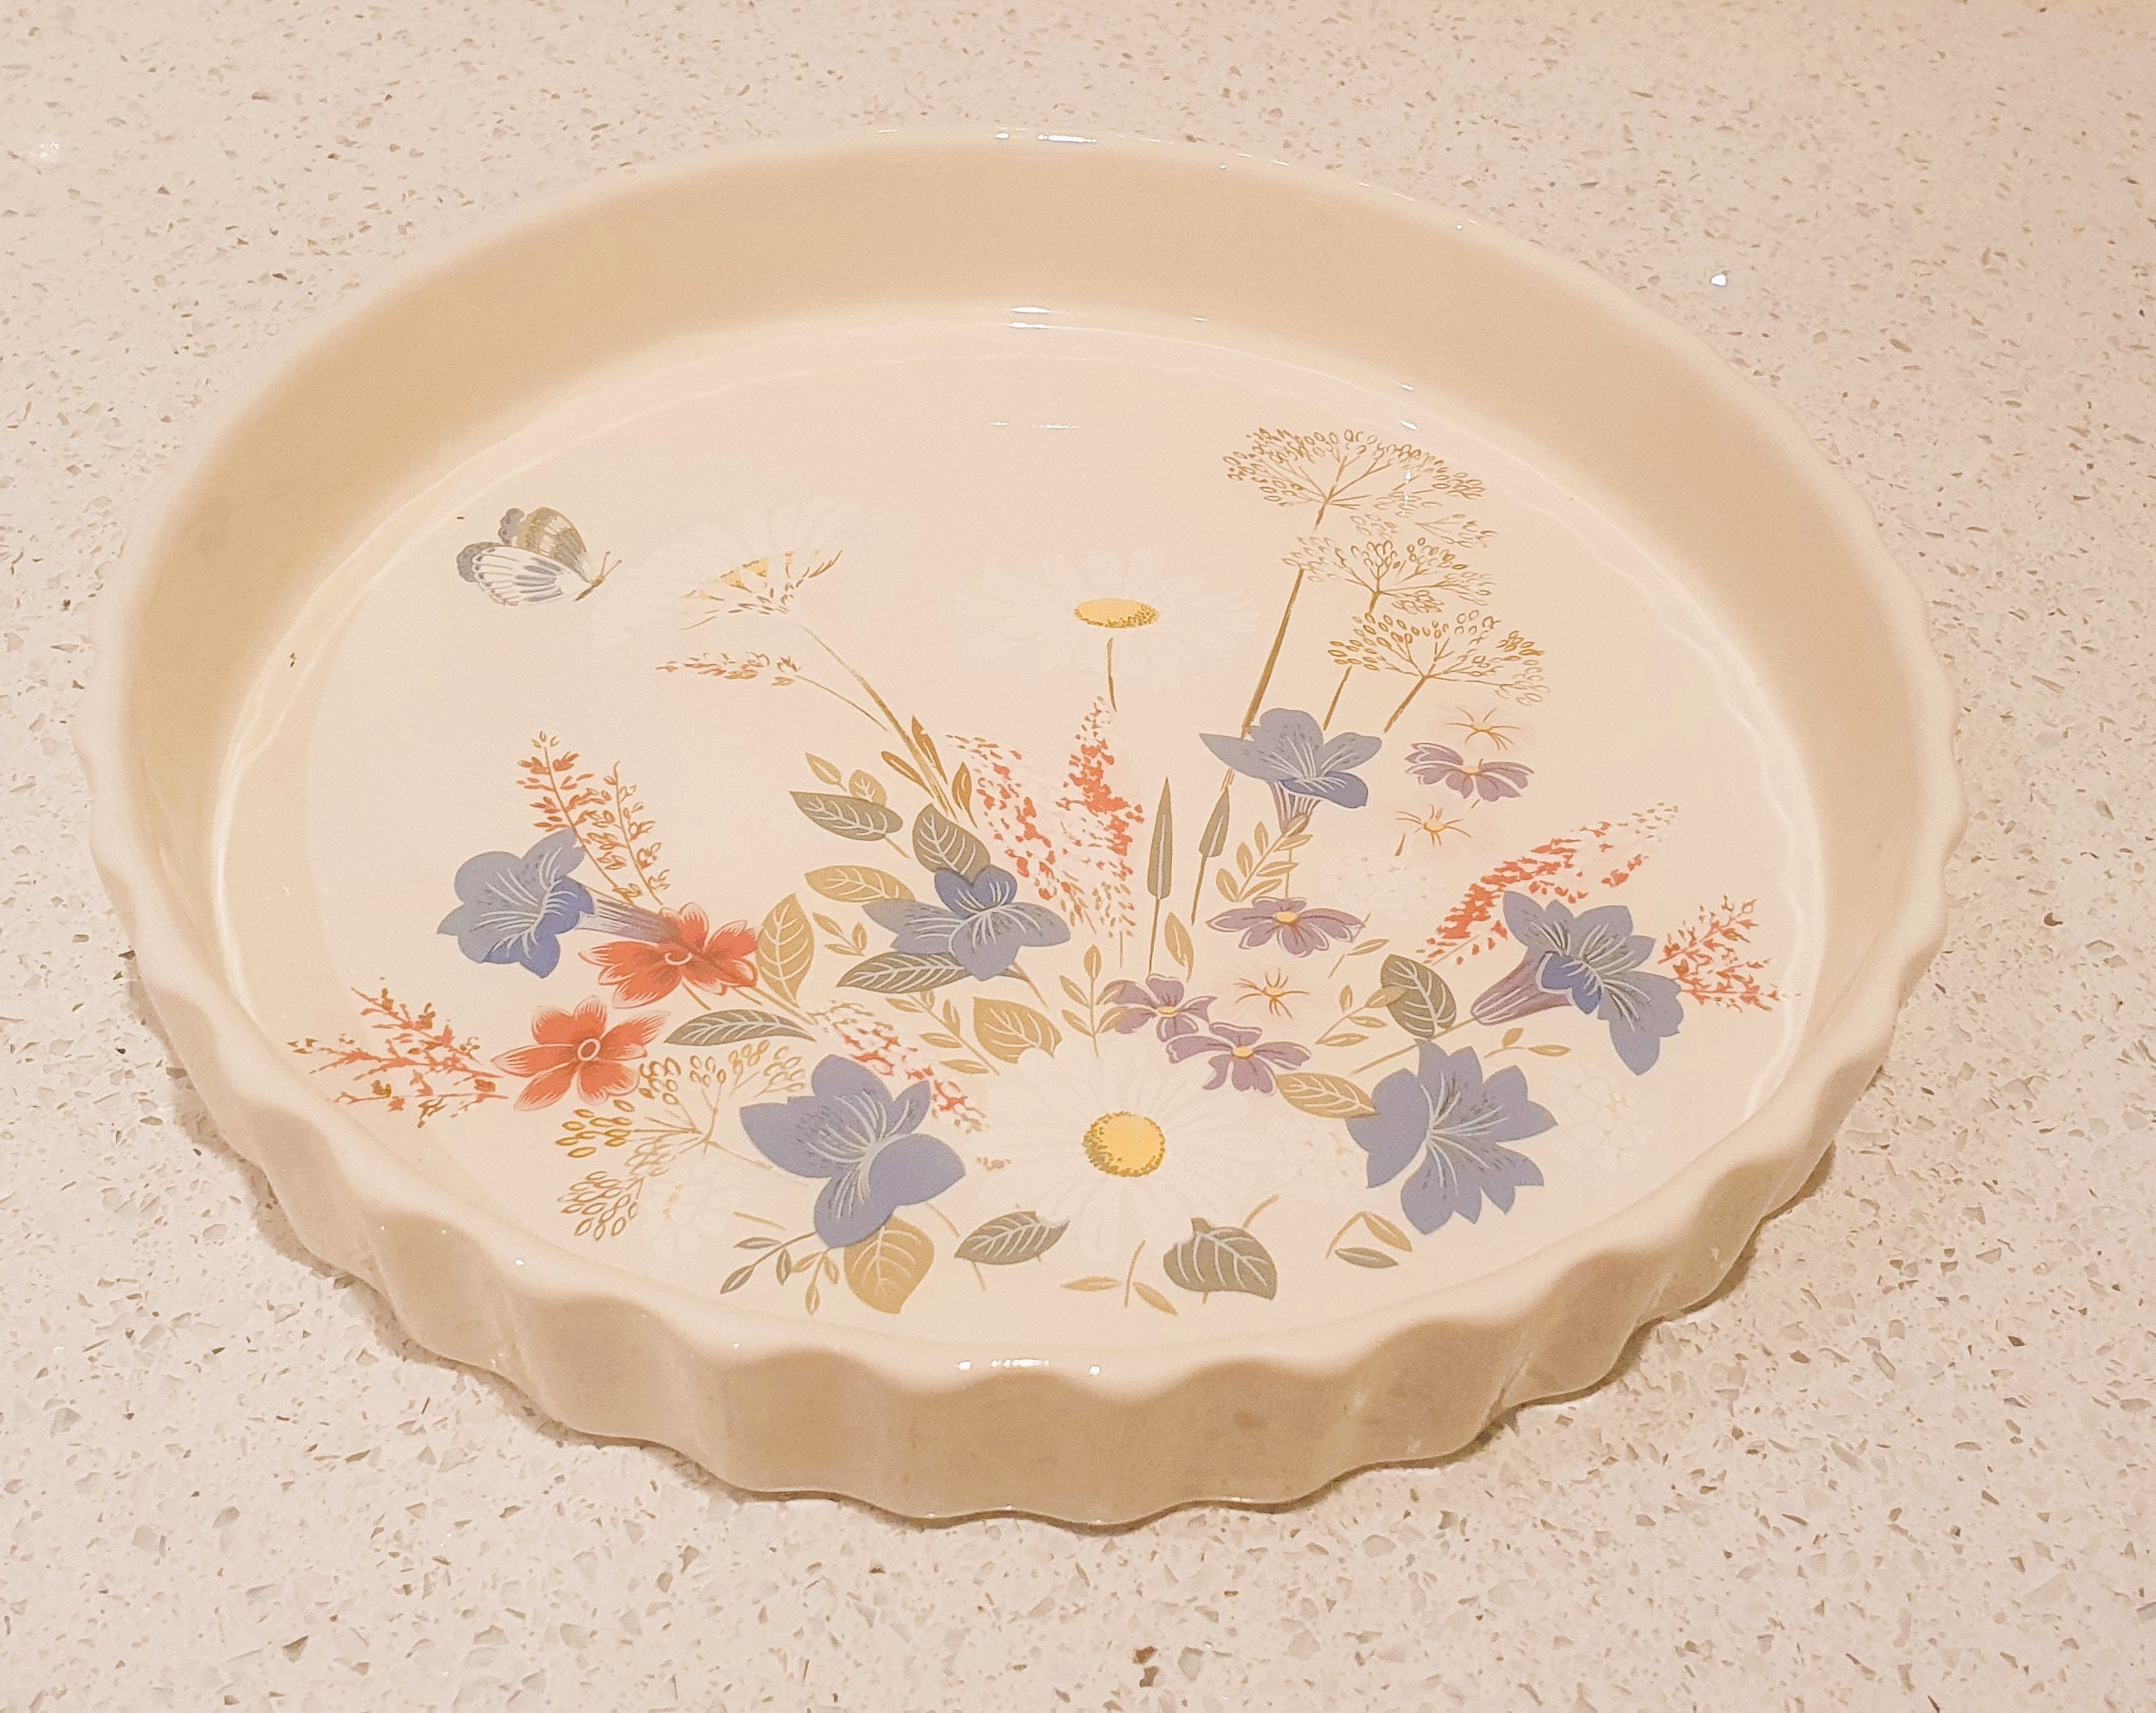 The Pioneer Woman Floral Medley 9-Inch Ceramic Pie Plate *FREE SHIPPING*